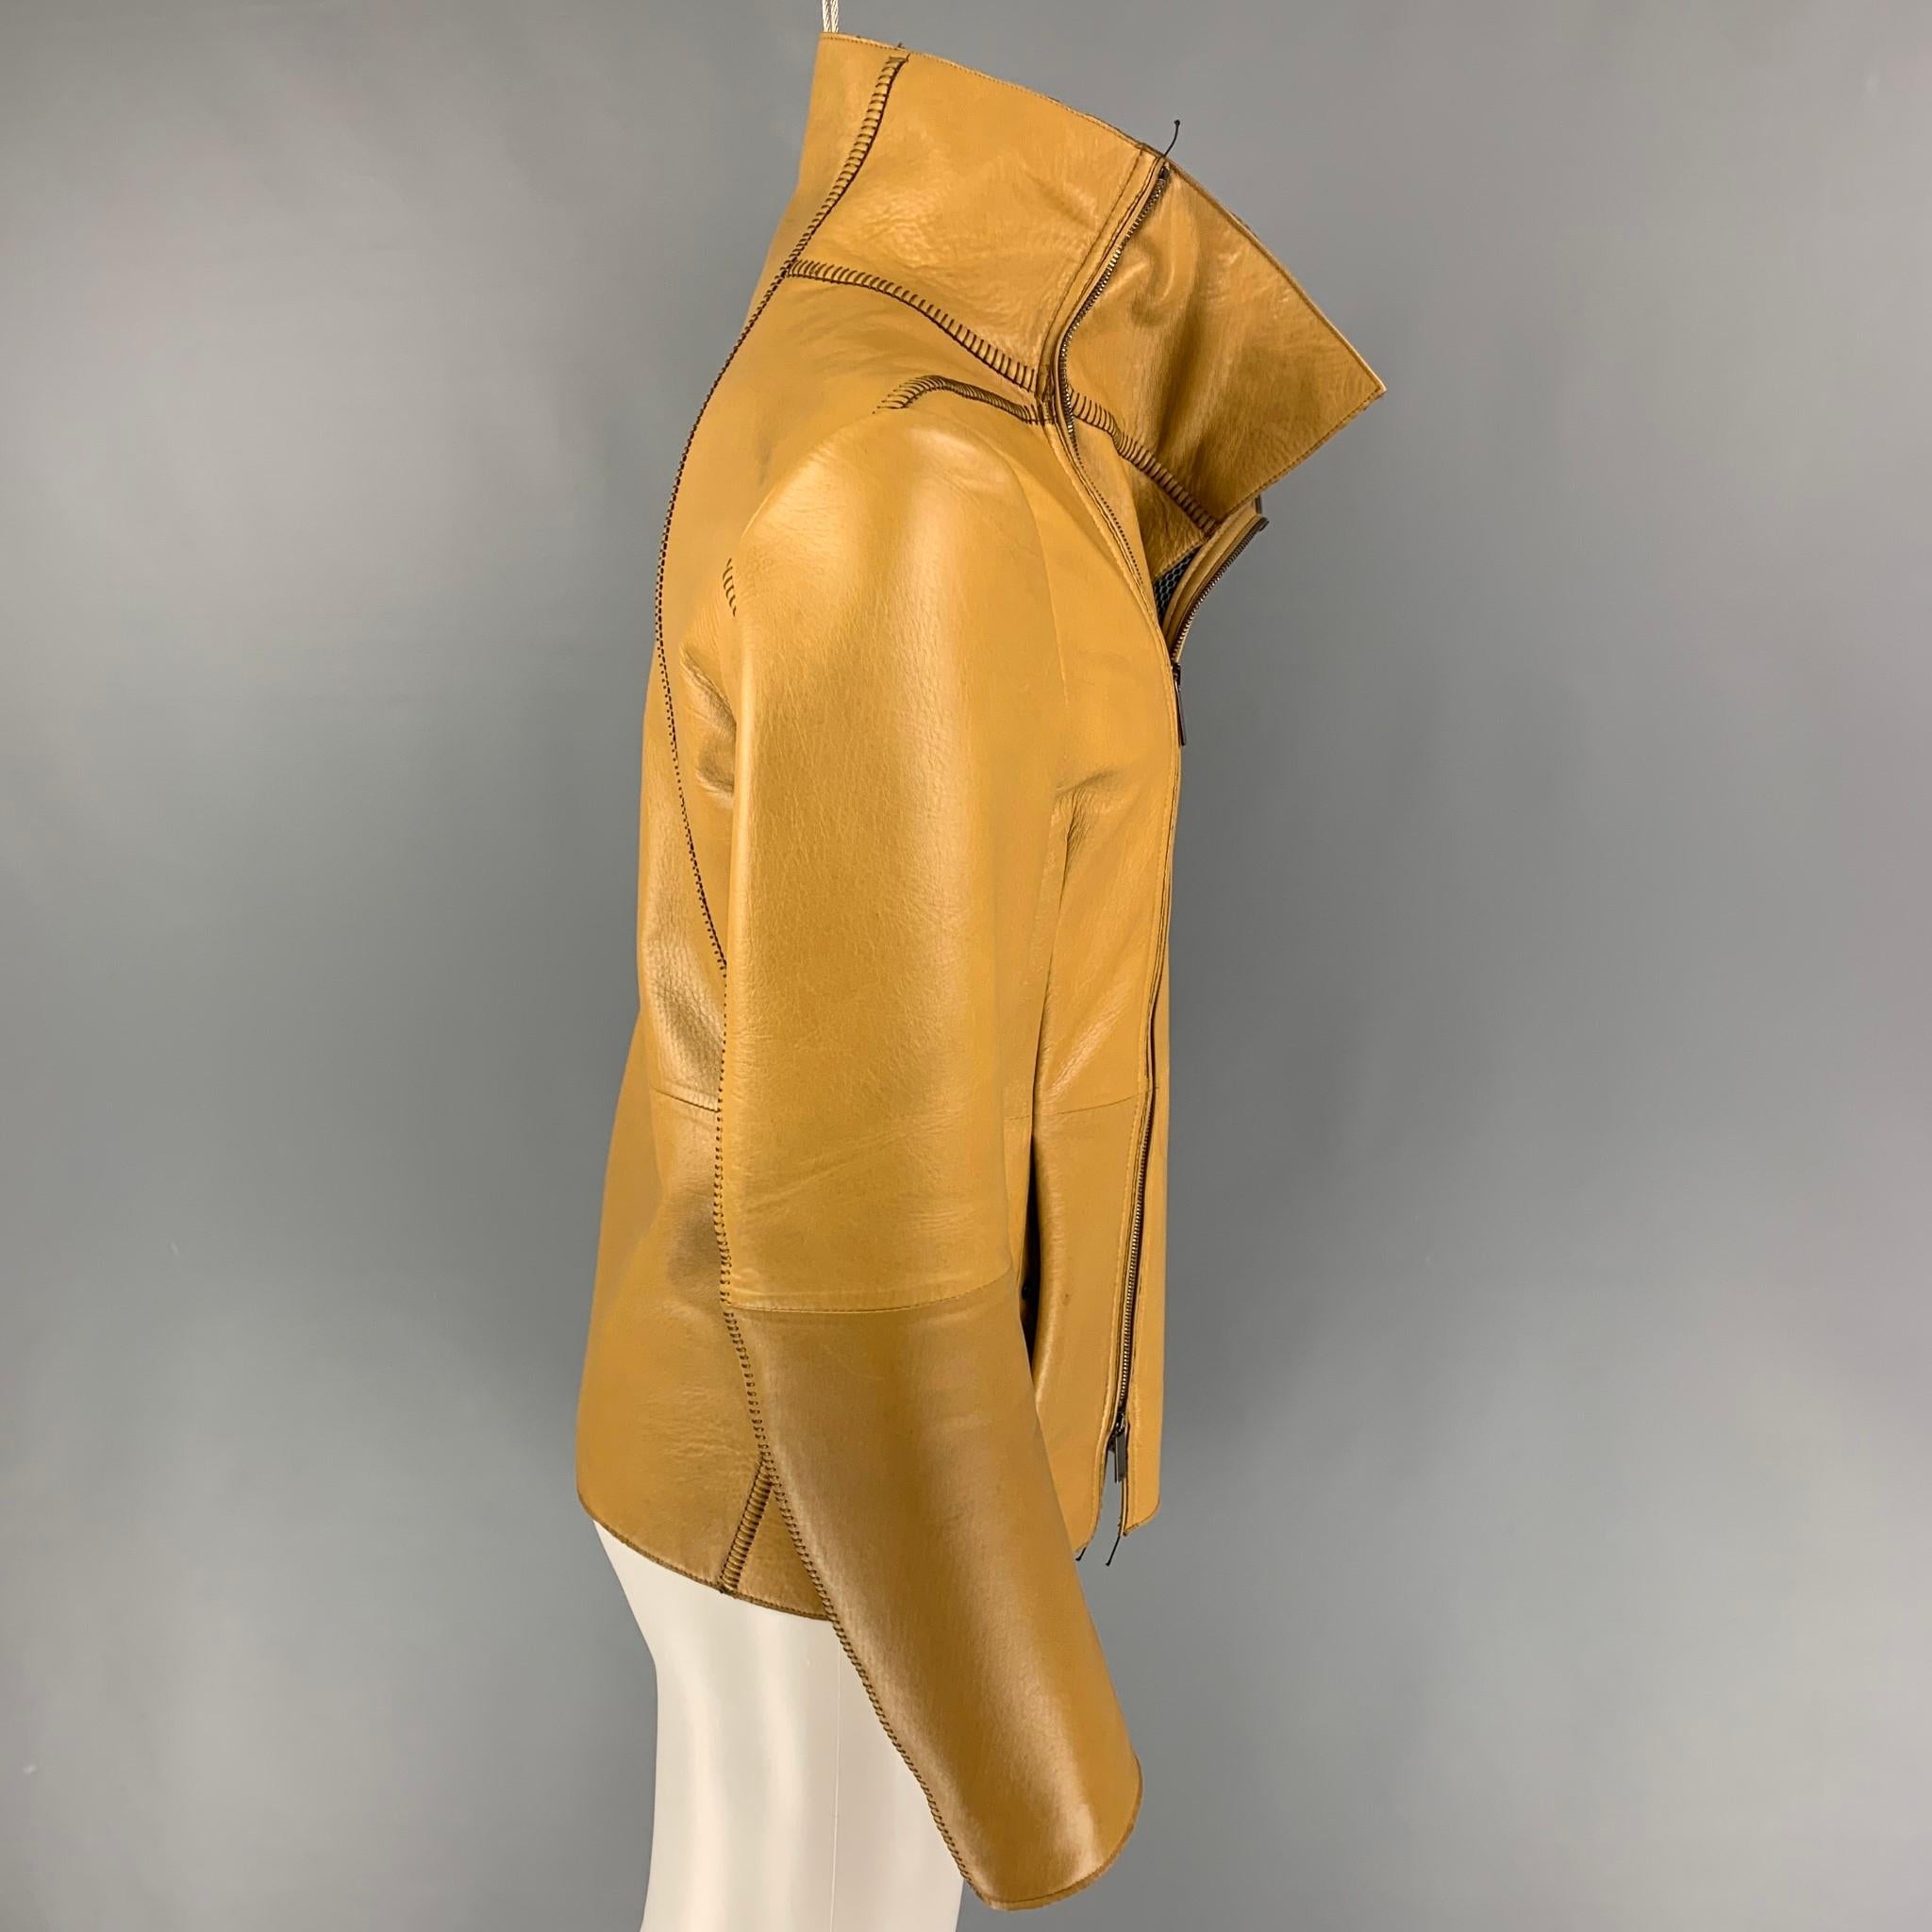 EMPORIO ARMANI jacket comes in a tan leather featuring a mesh liner featuring a high collar, top stitching, slit pockets, and a asymmetrical zip up closure. Made in Italy. 

Very Good Pre-Owned Condition. Light marks at back.
Marked: